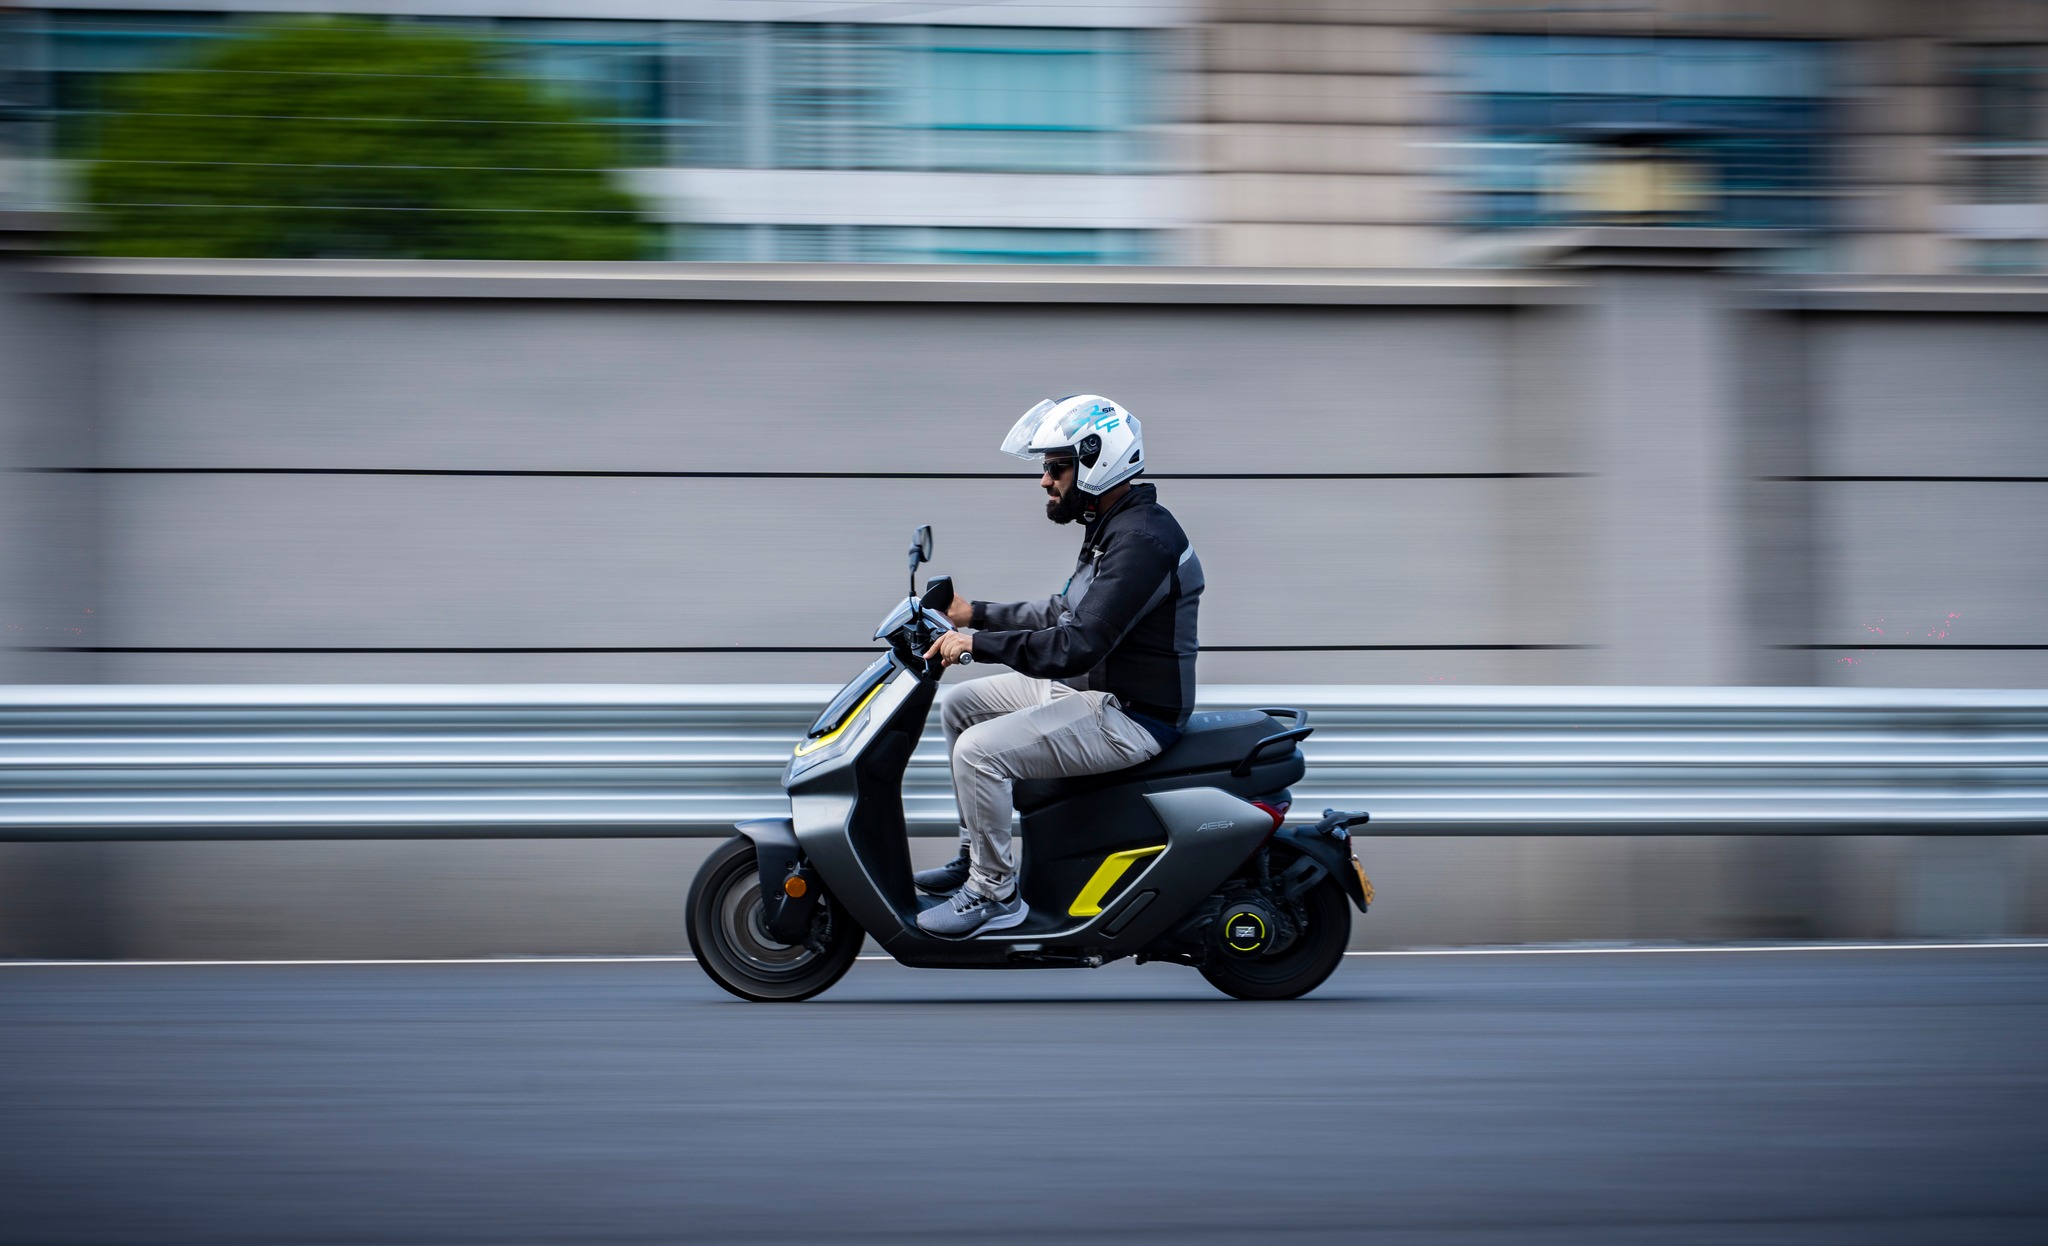 Zeeho Ae6+: Premium electric scooter with impressive looks and features launched in Nepal